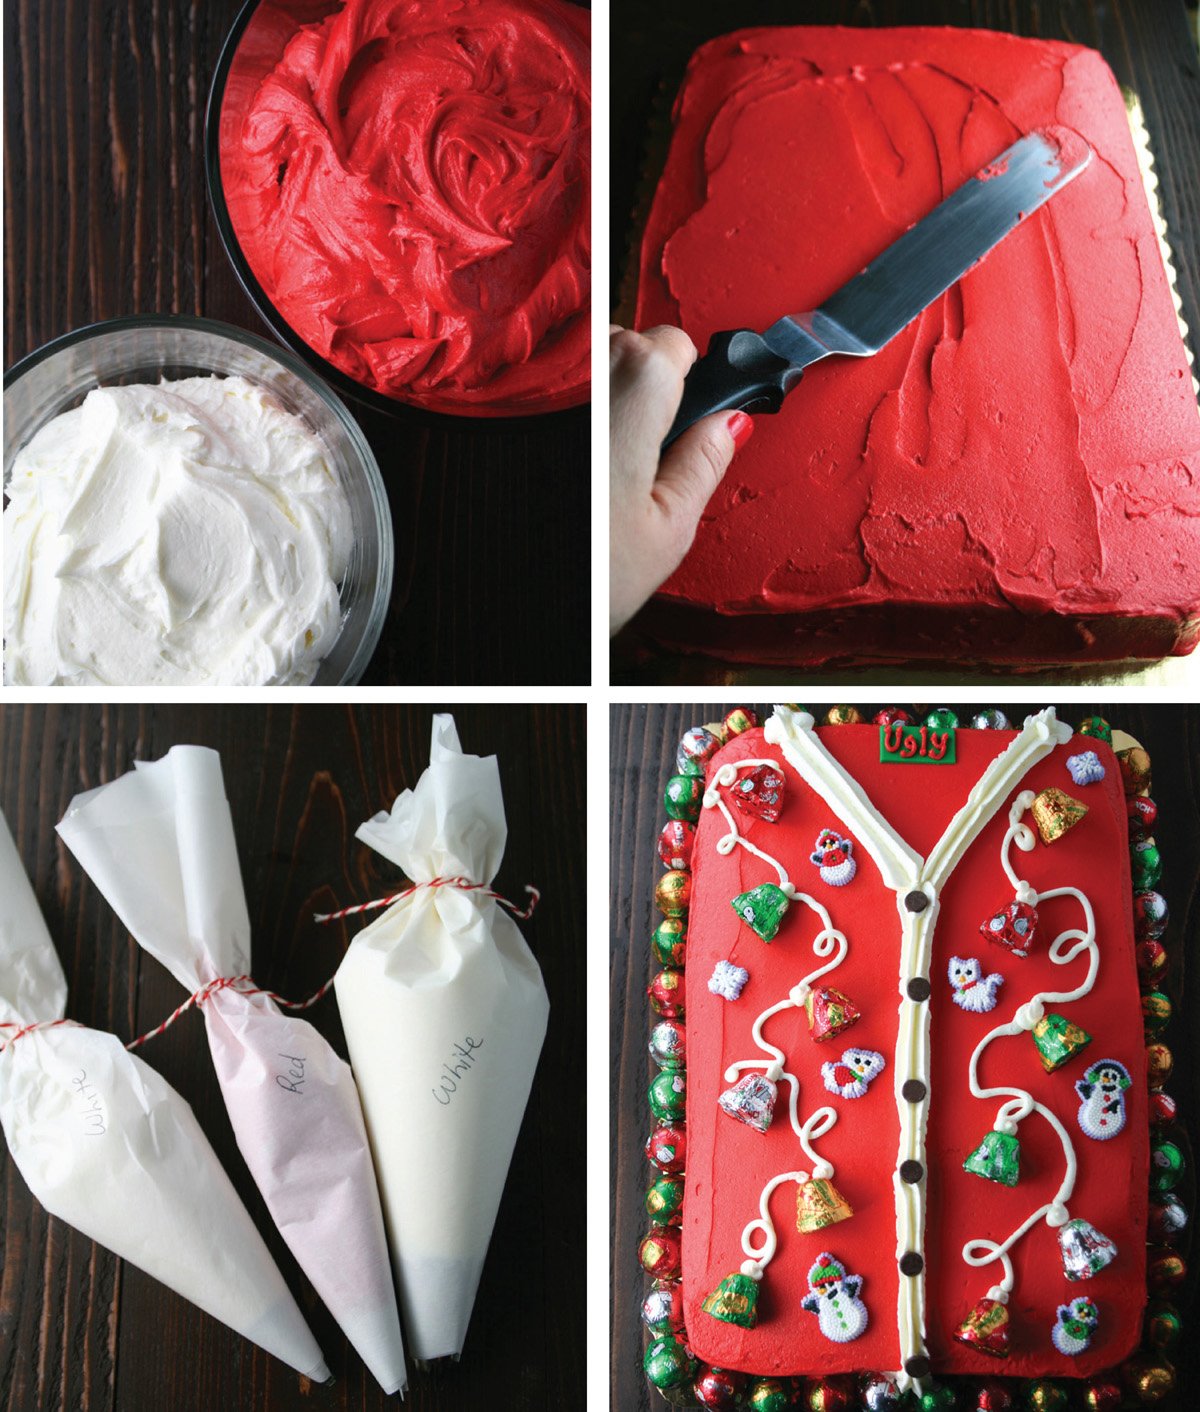 How to make an ugly sweater cake.